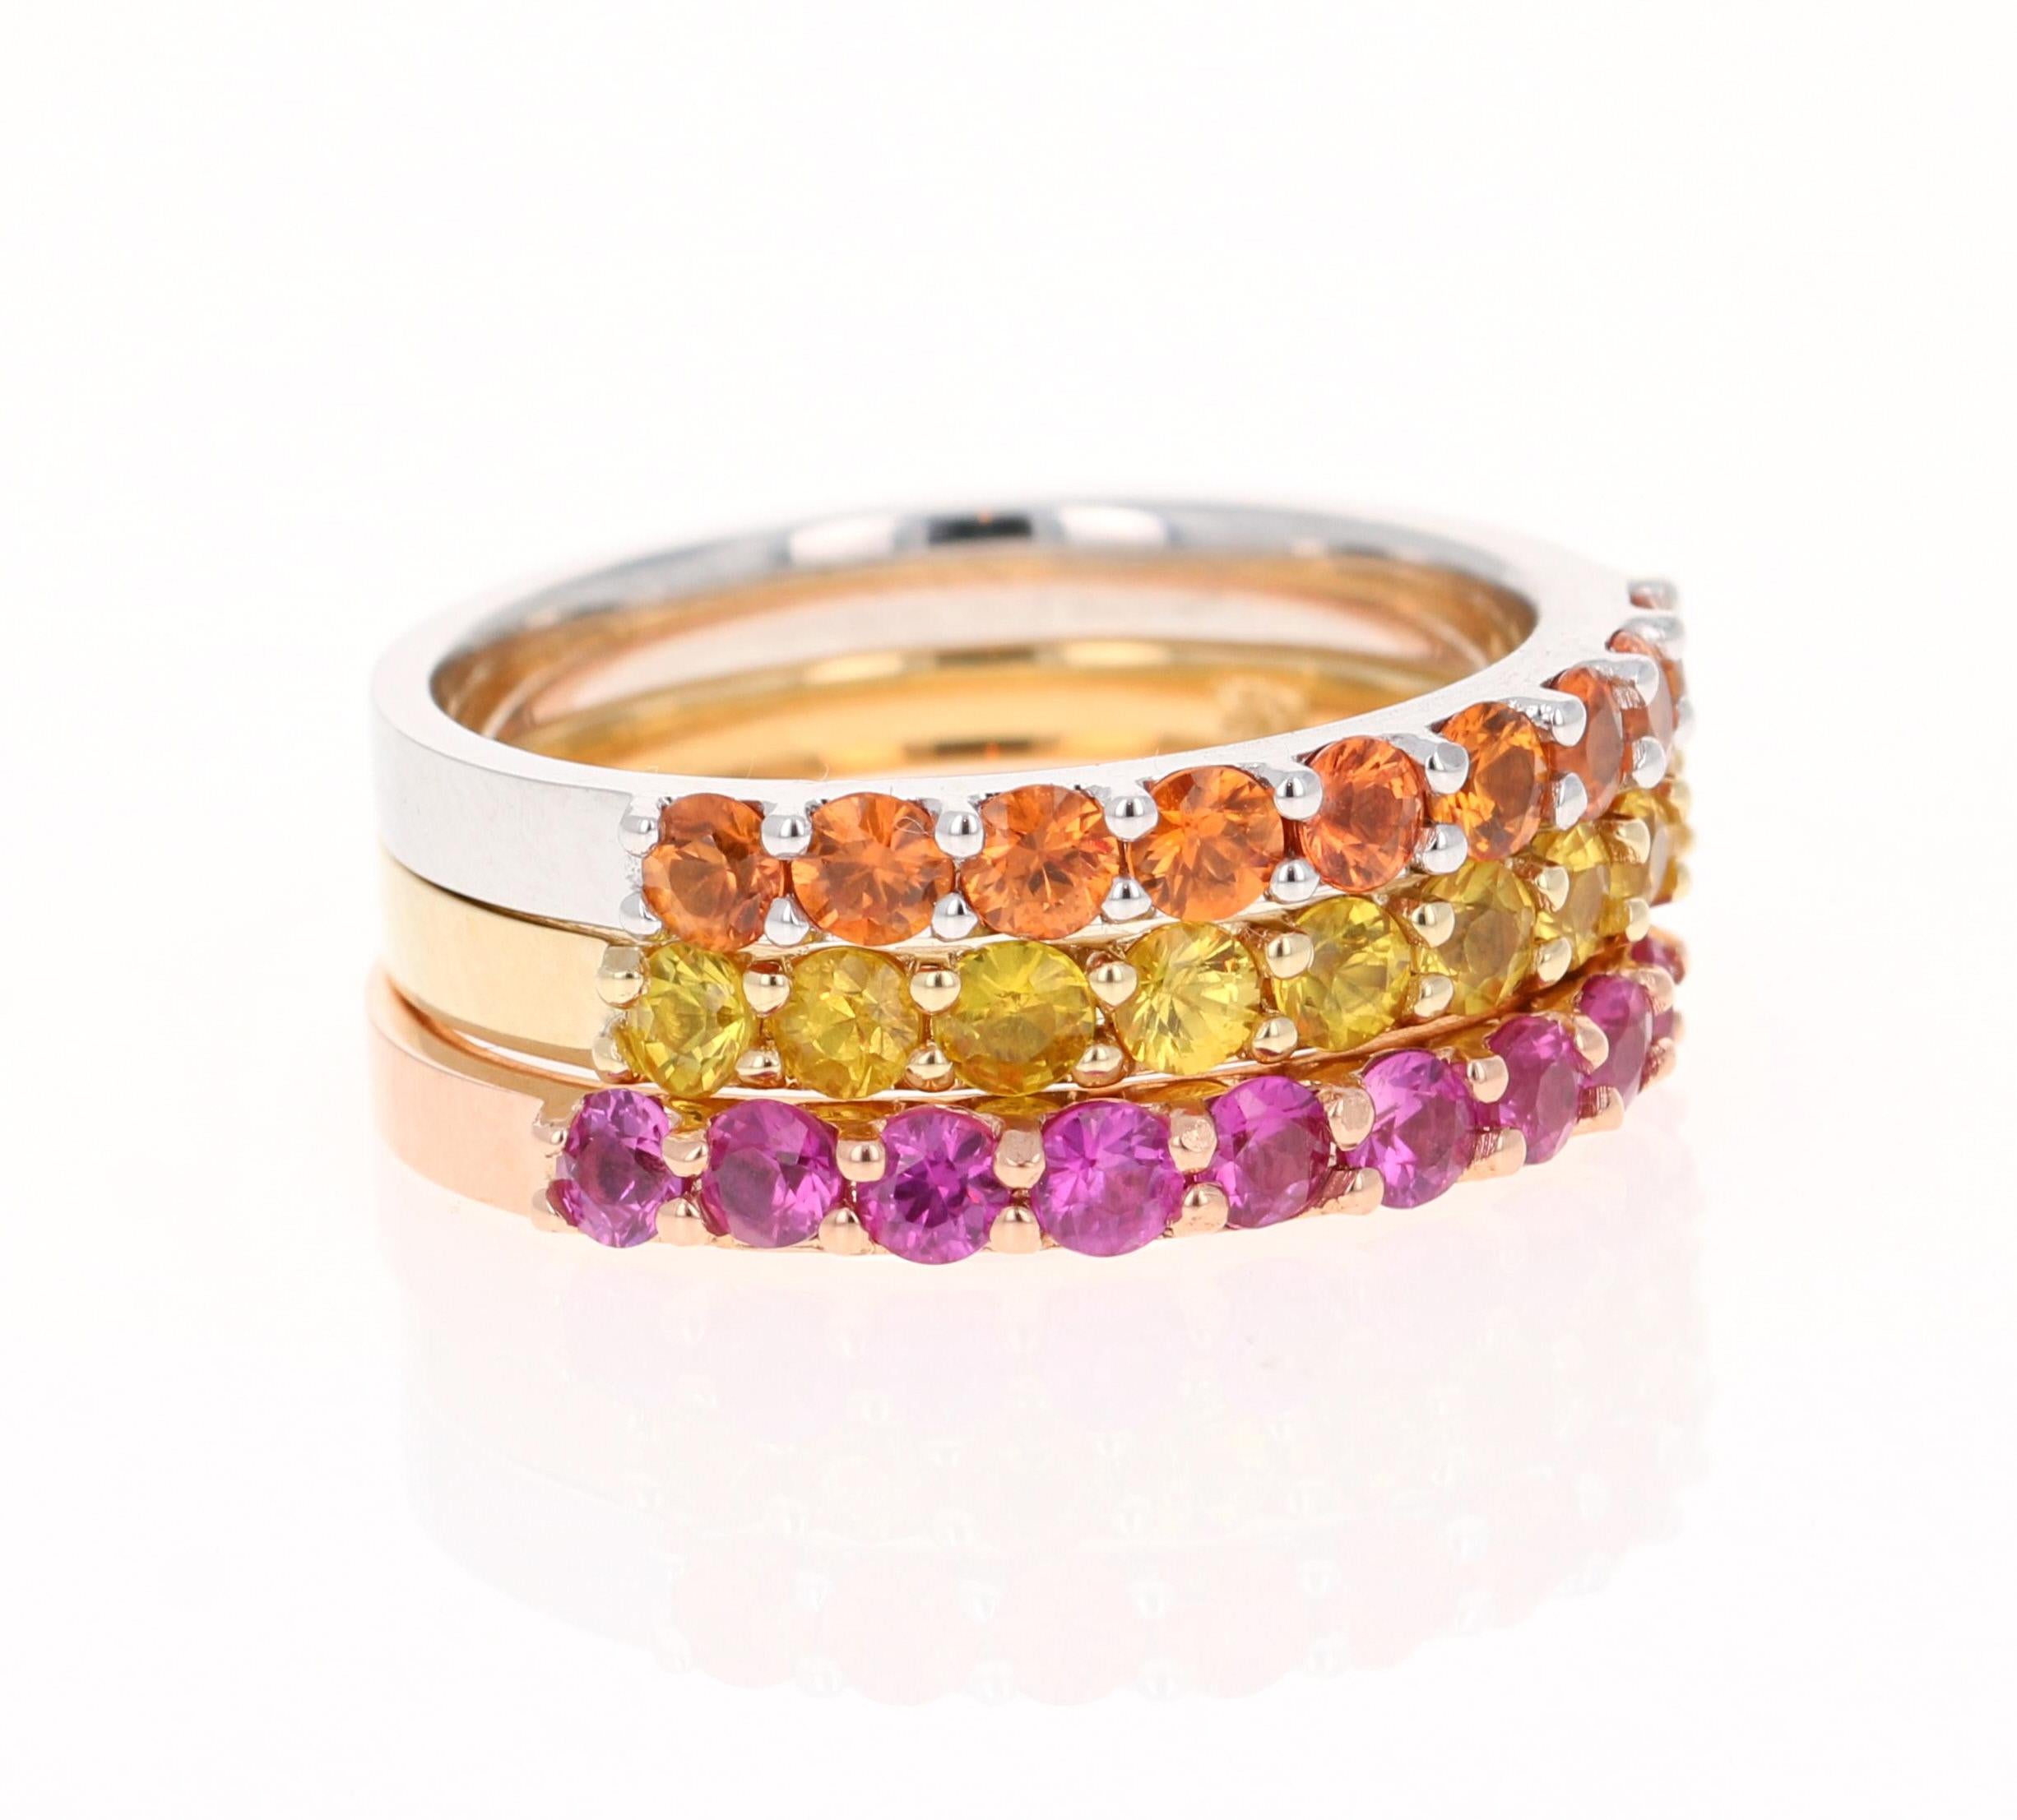 Set of 3 elegant and classy 2.03 Carat Sapphire bands that are sure to be a great addition to your accessory collection! There are 9 Round Cut Sapphires (Pink, Yellow and Orange Sapphires) in each band that weigh approximately 0.67 Carats each.  The